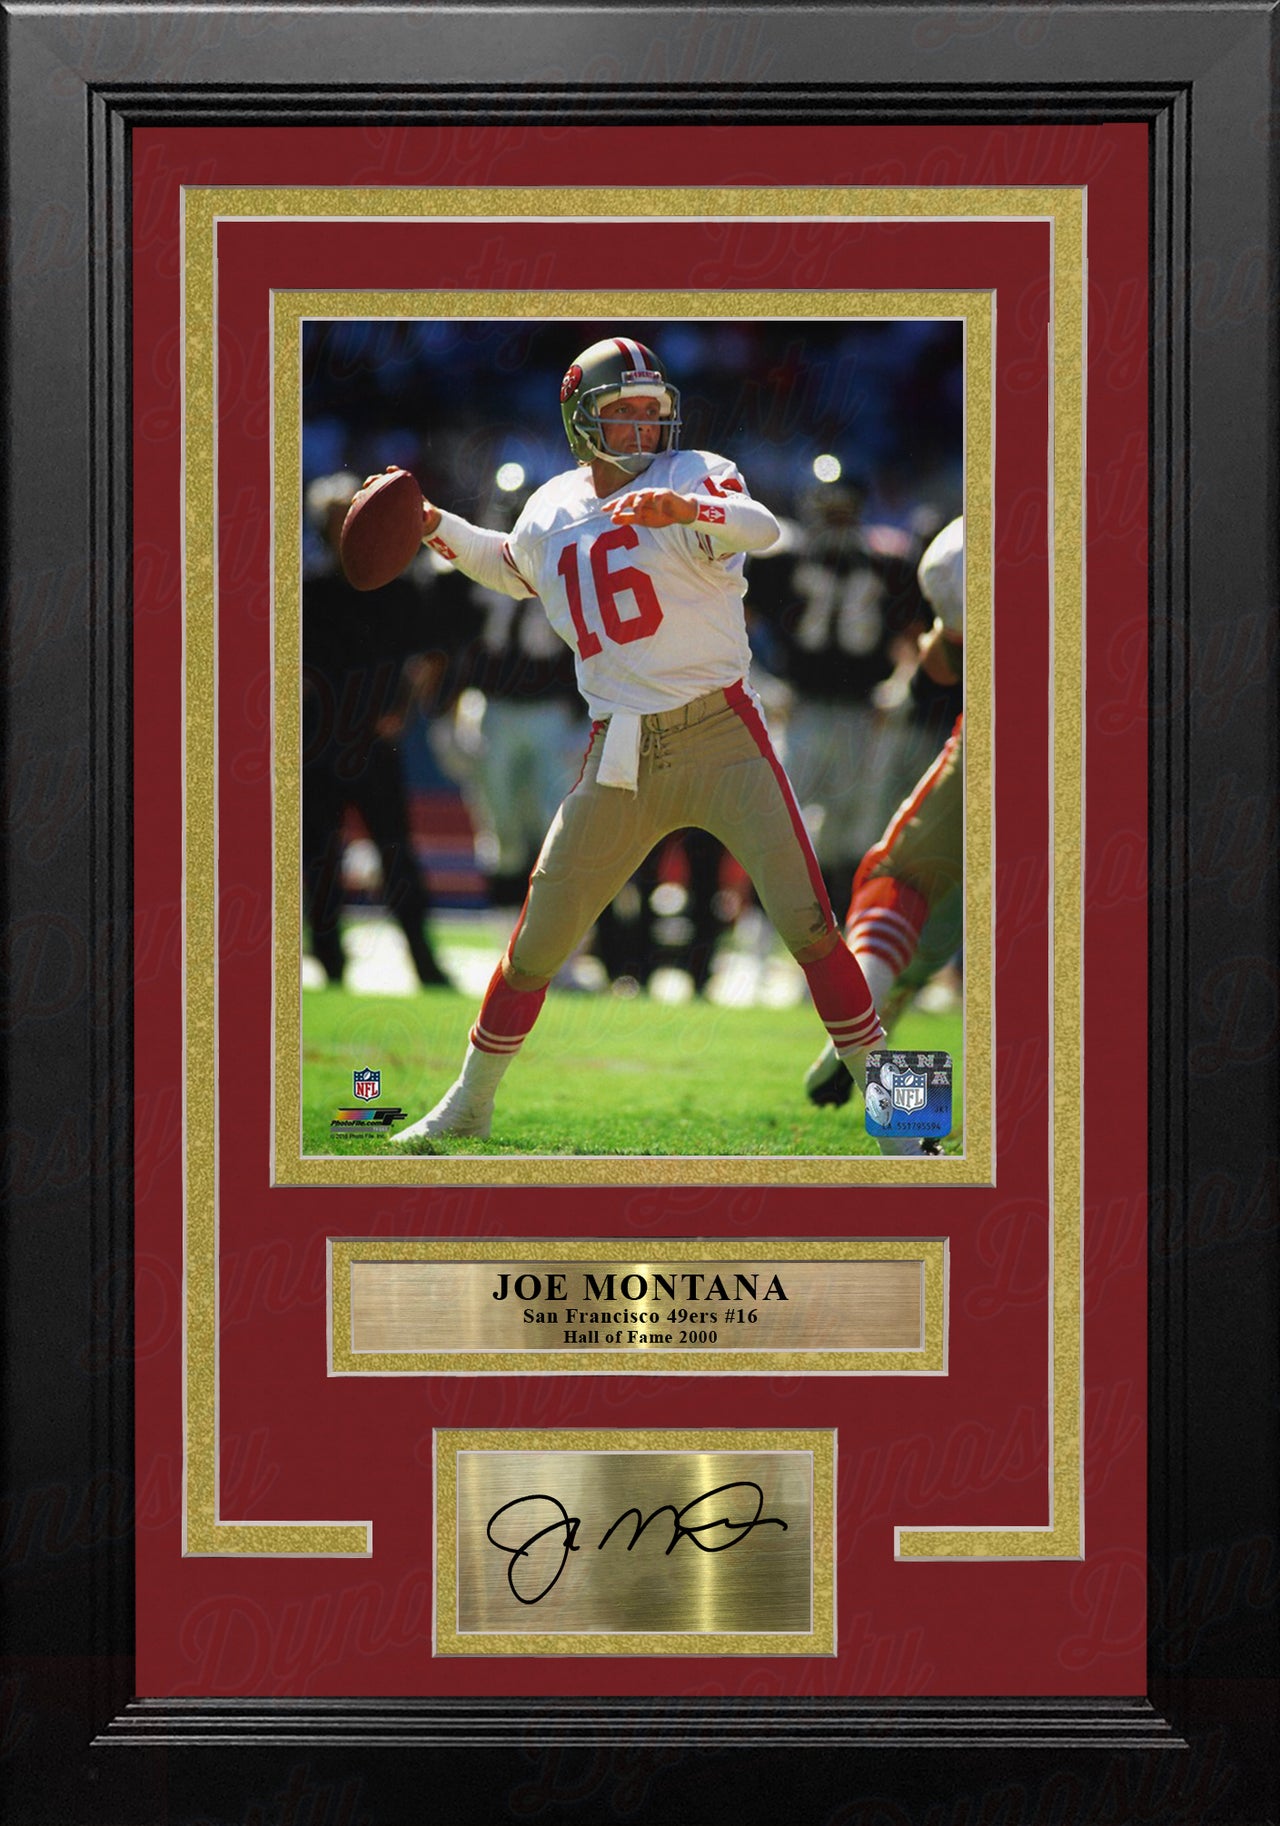 Joe Montana in Action San Francisco 49ers 8" x 10" Framed Football Photo with Engraved Autograph - Dynasty Sports & Framing 